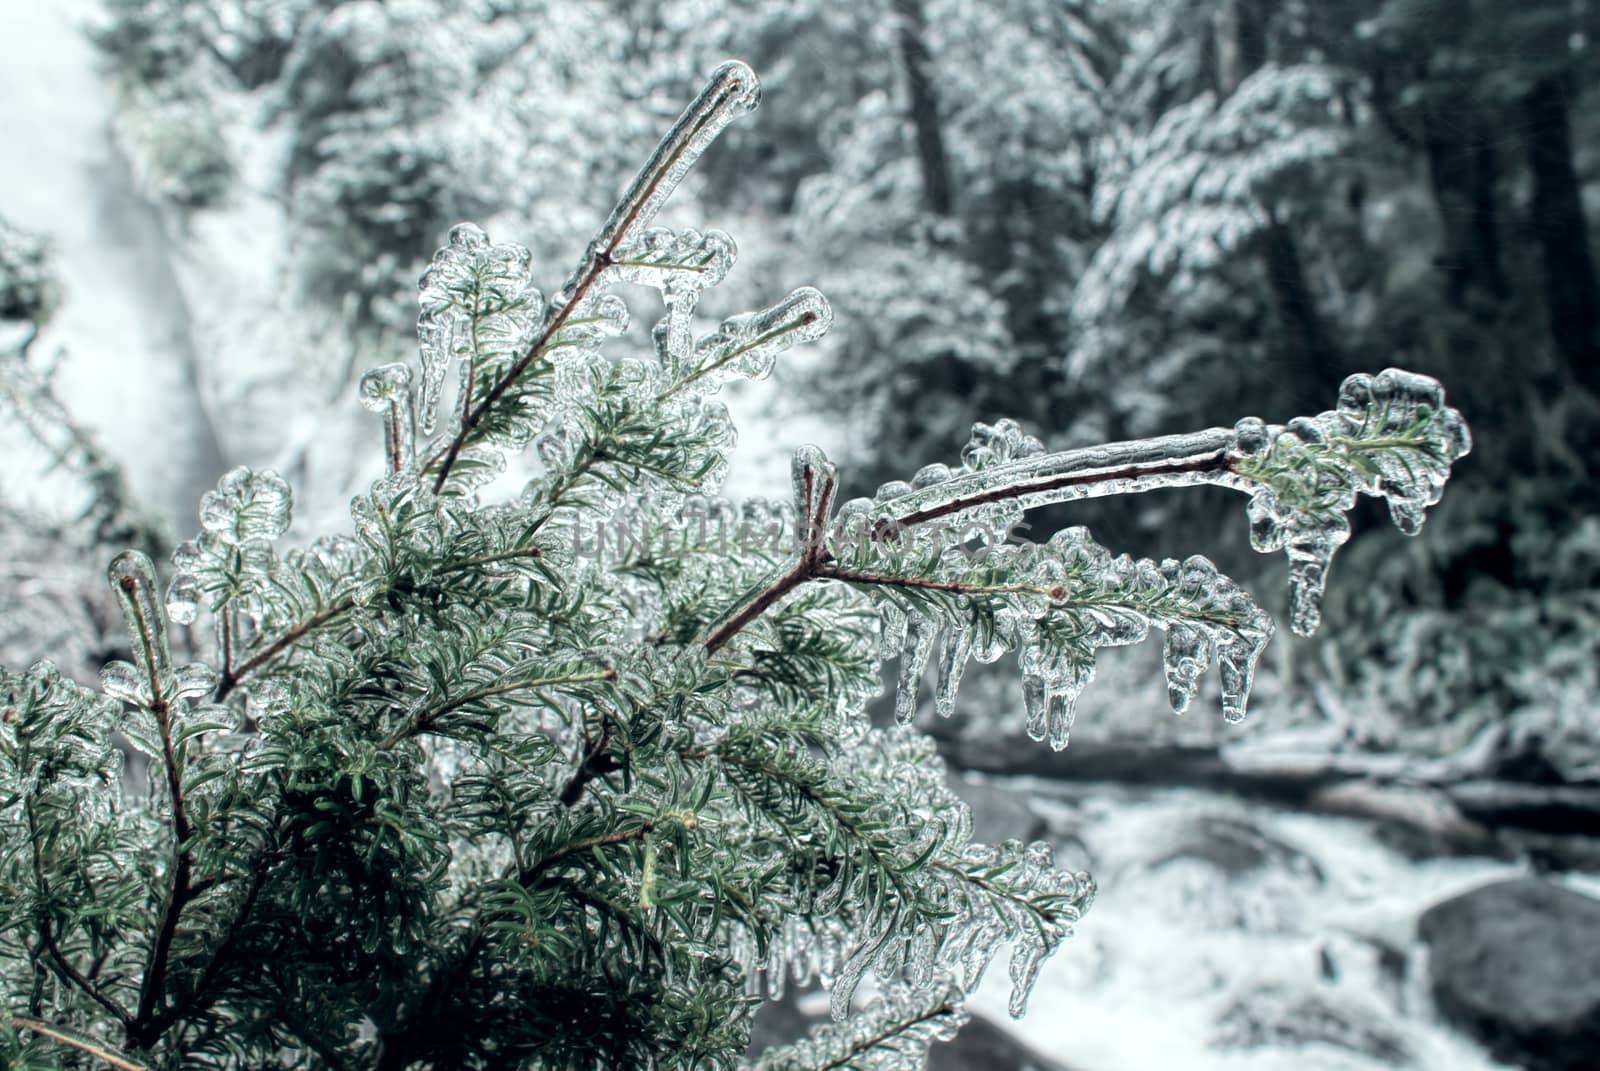 Close-up view of a clear rime covering a coniferous branch